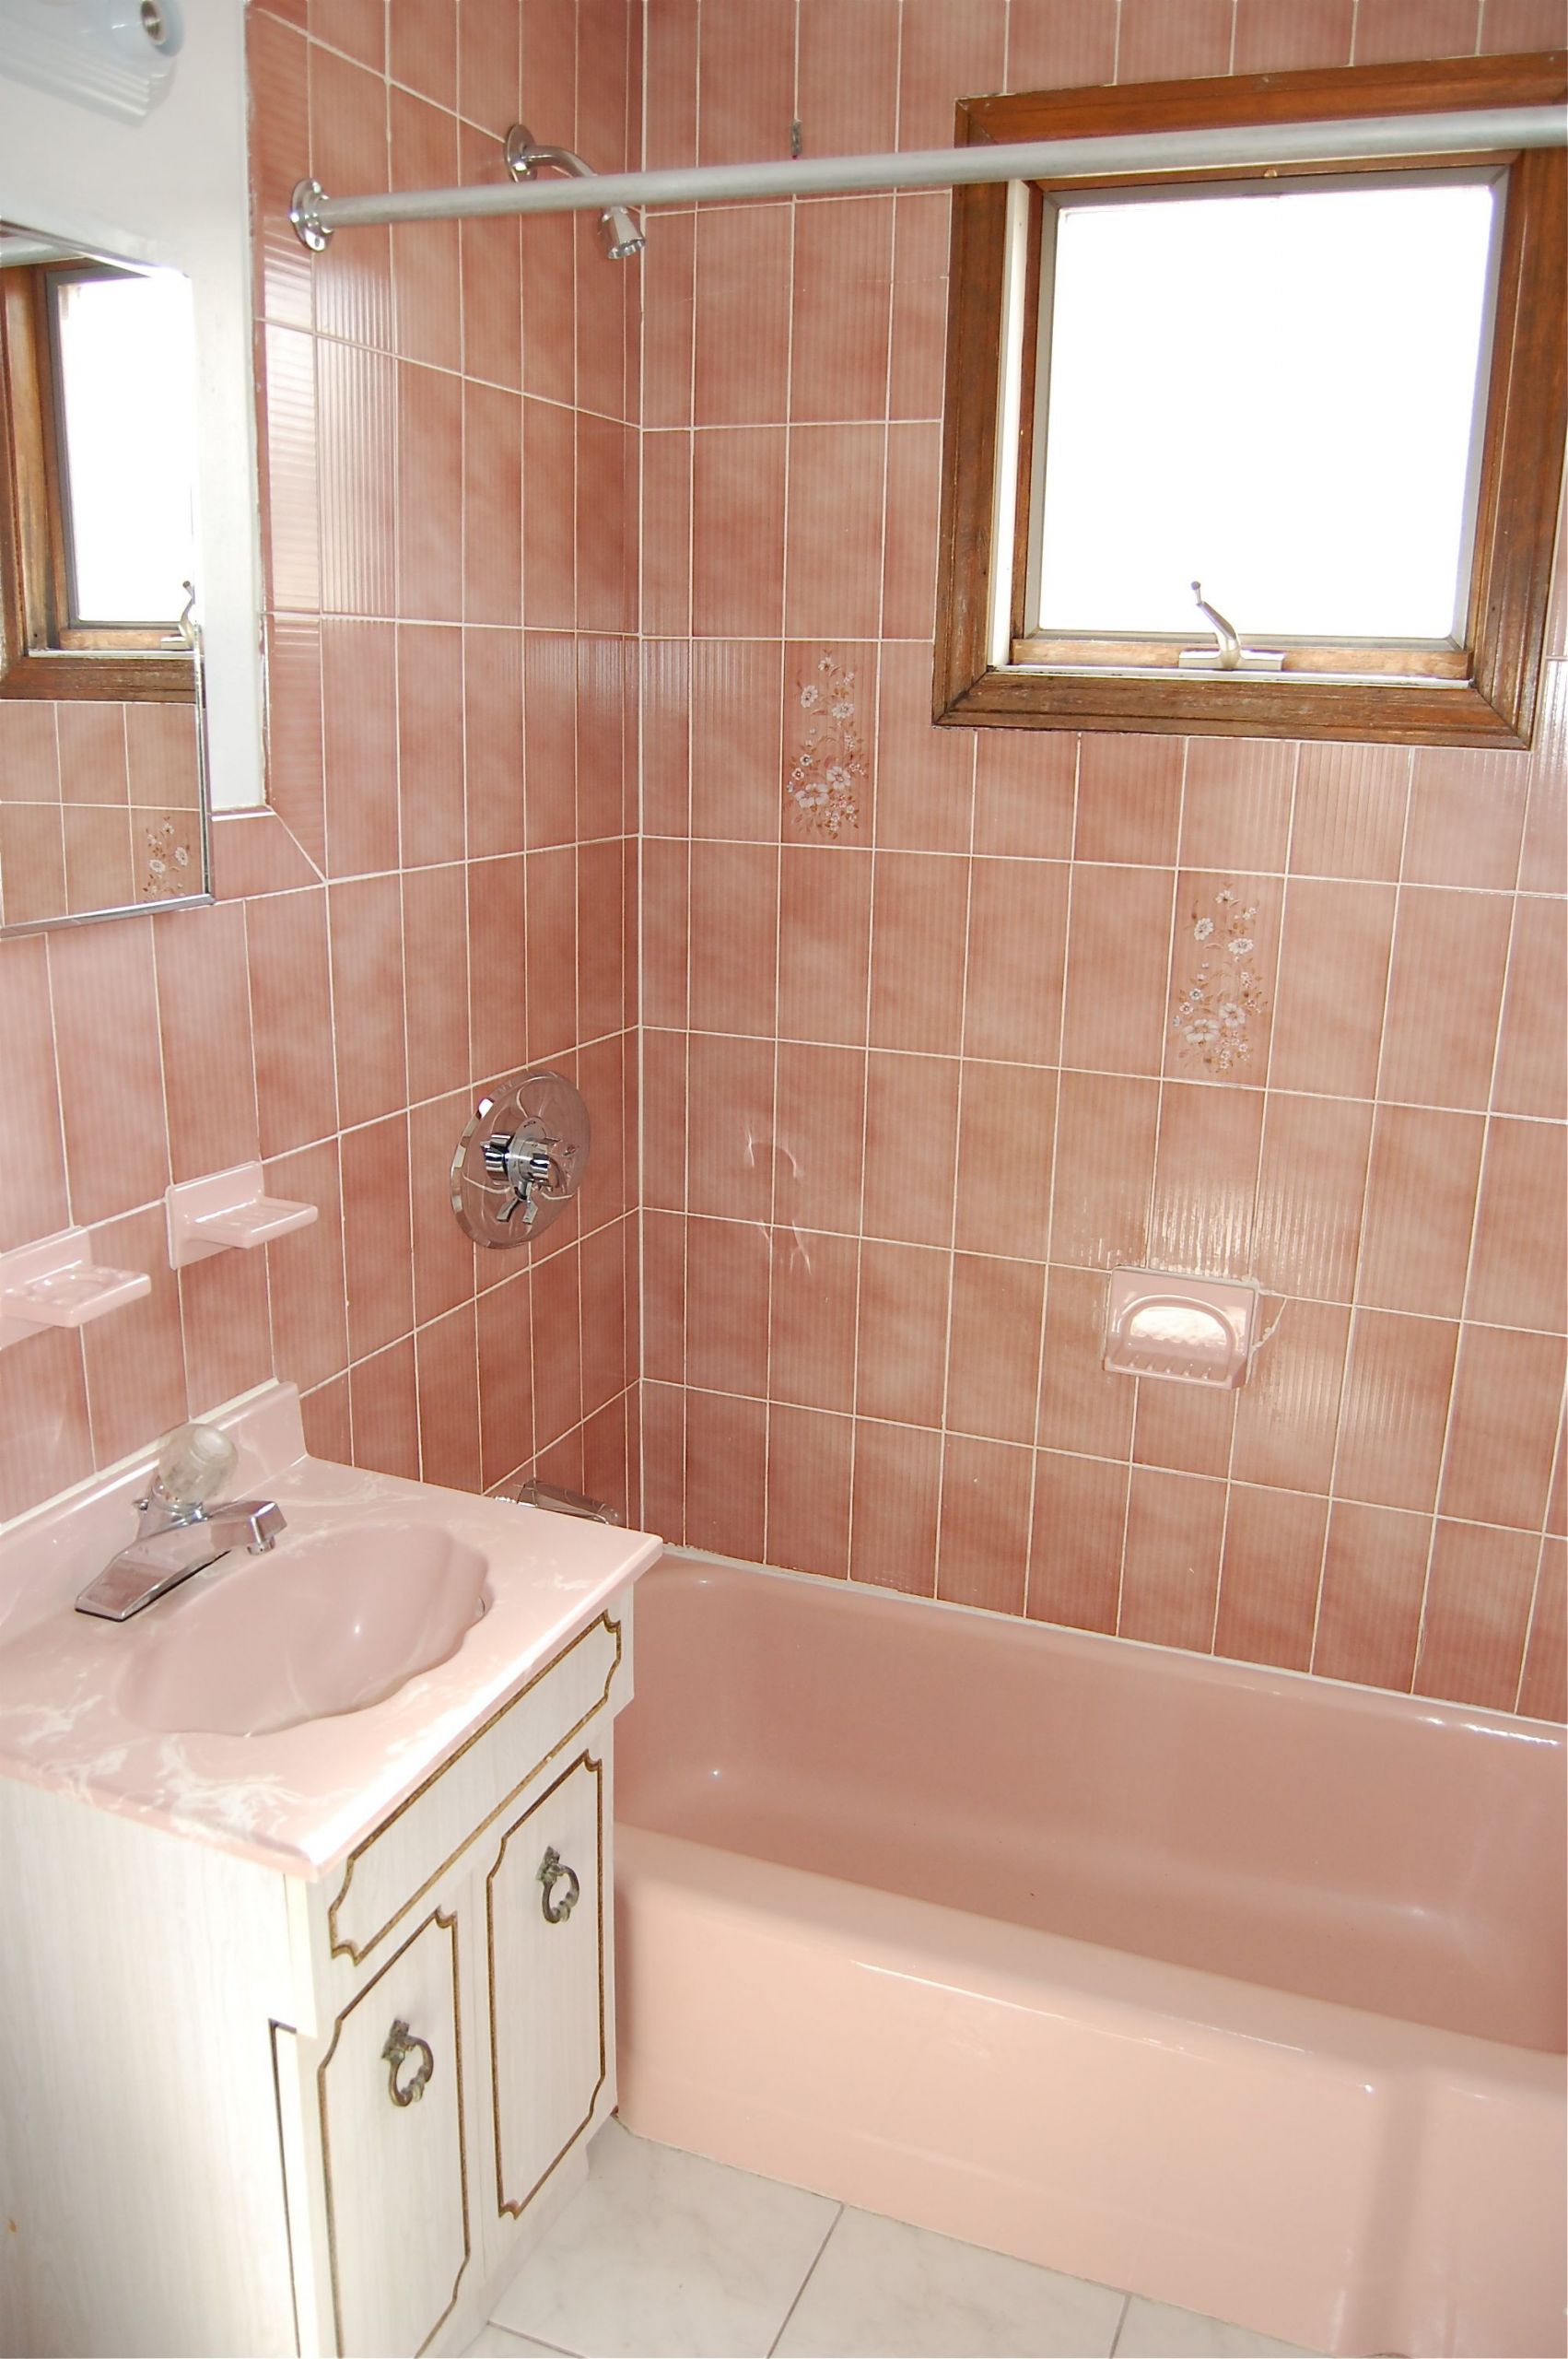 Peach Tile Bathroom
 Happy New Year and the Pink Tile Bathroom is Back